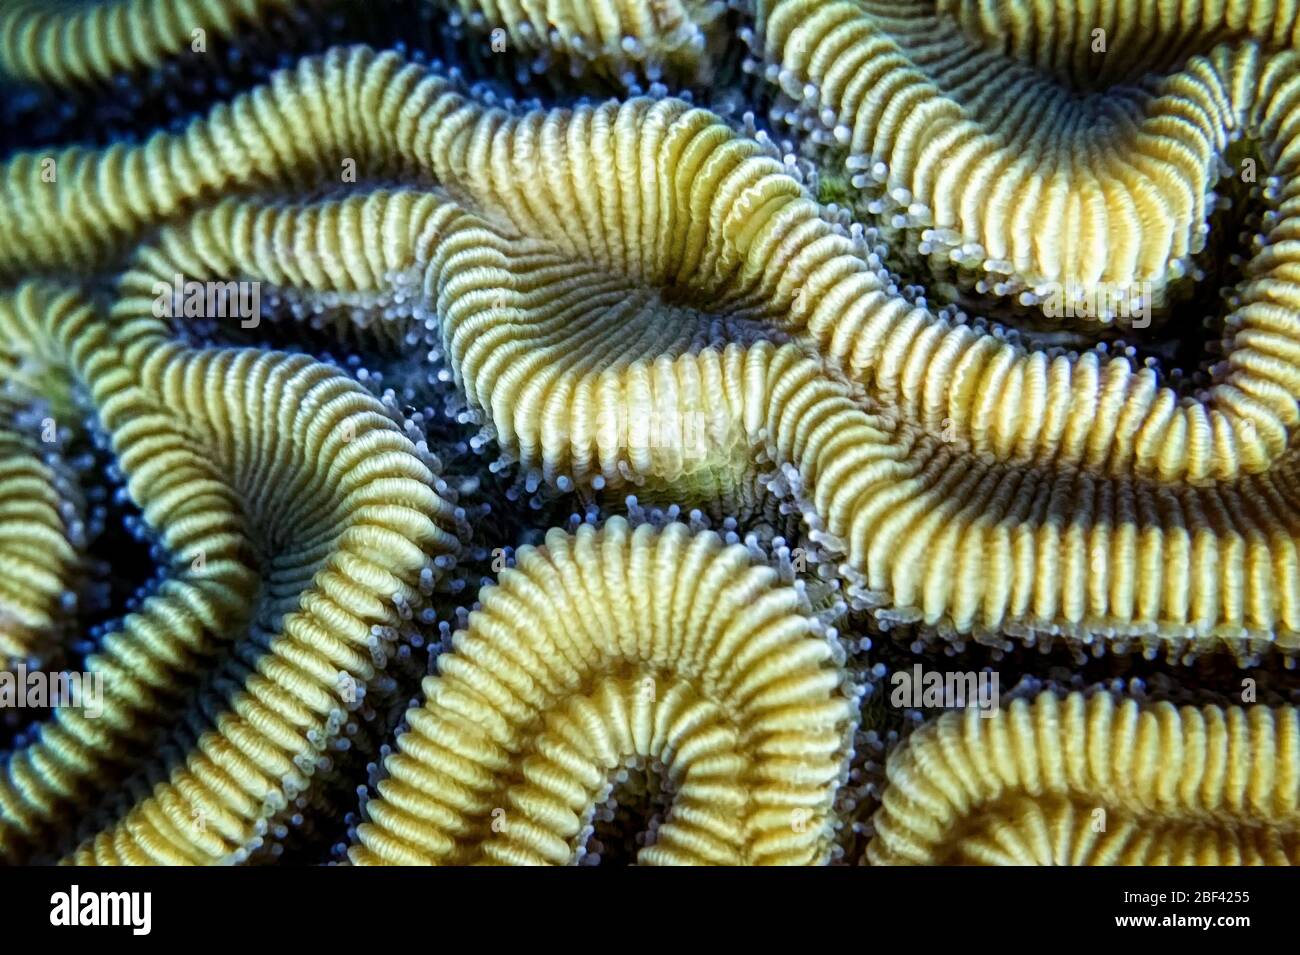 Closeup of grooved brain coral (Diploria labyrinthiformis) polyps and structure on a coral reef, Cayman Islands, Caribbean Sea, Atlantic Ocean, color Stock Photo